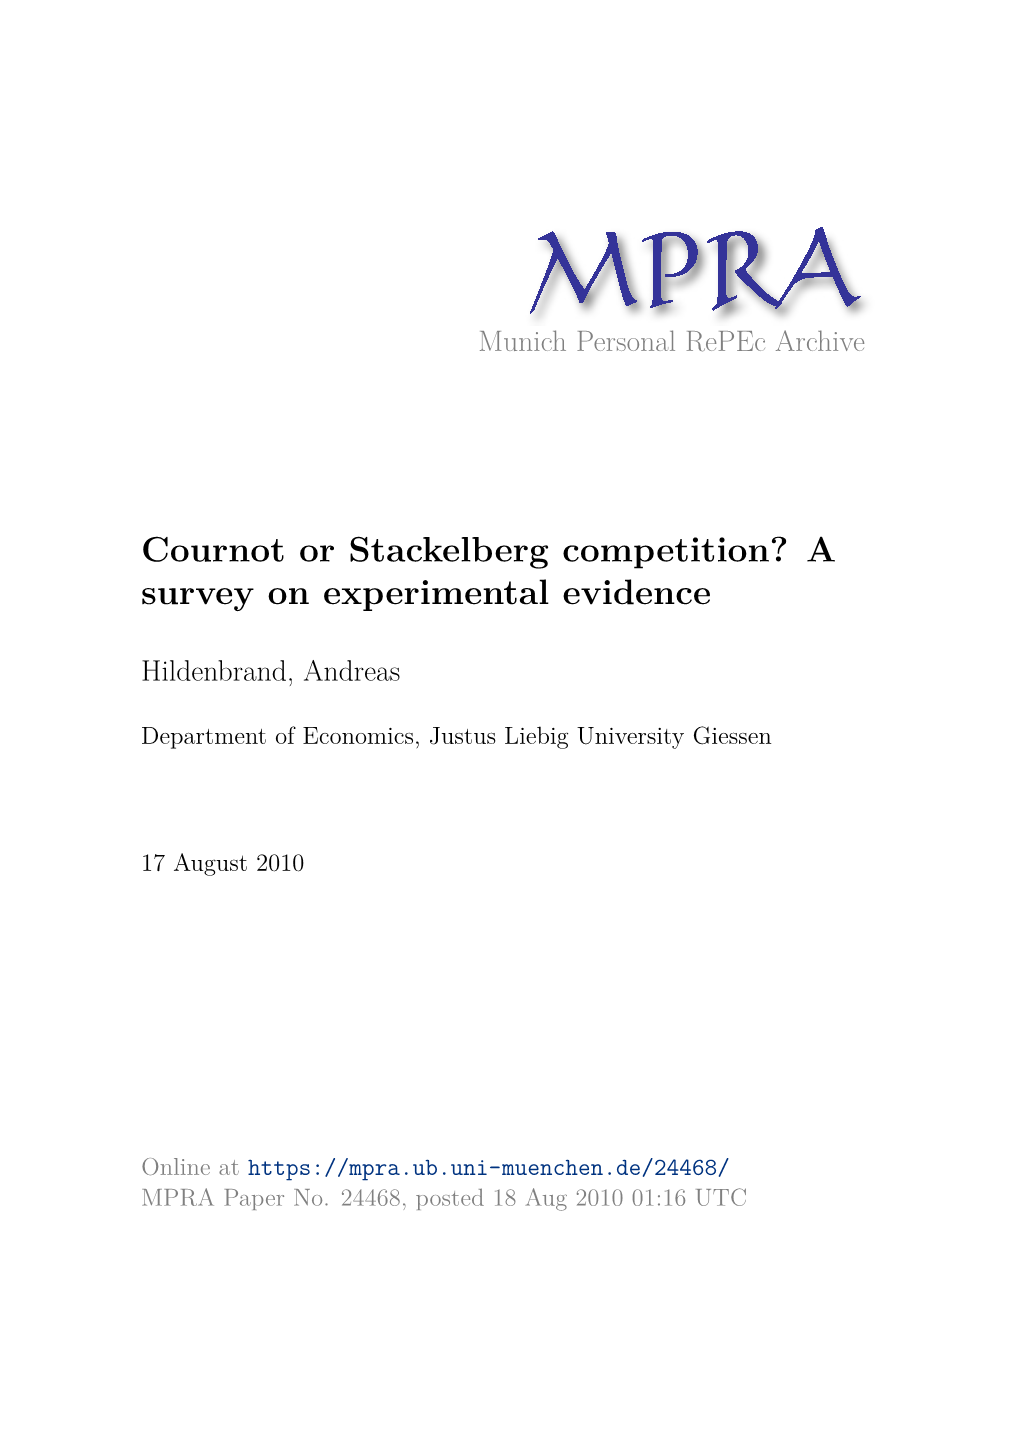 Cournot Or Stackelberg Competition? a Survey on Experimental Evidence